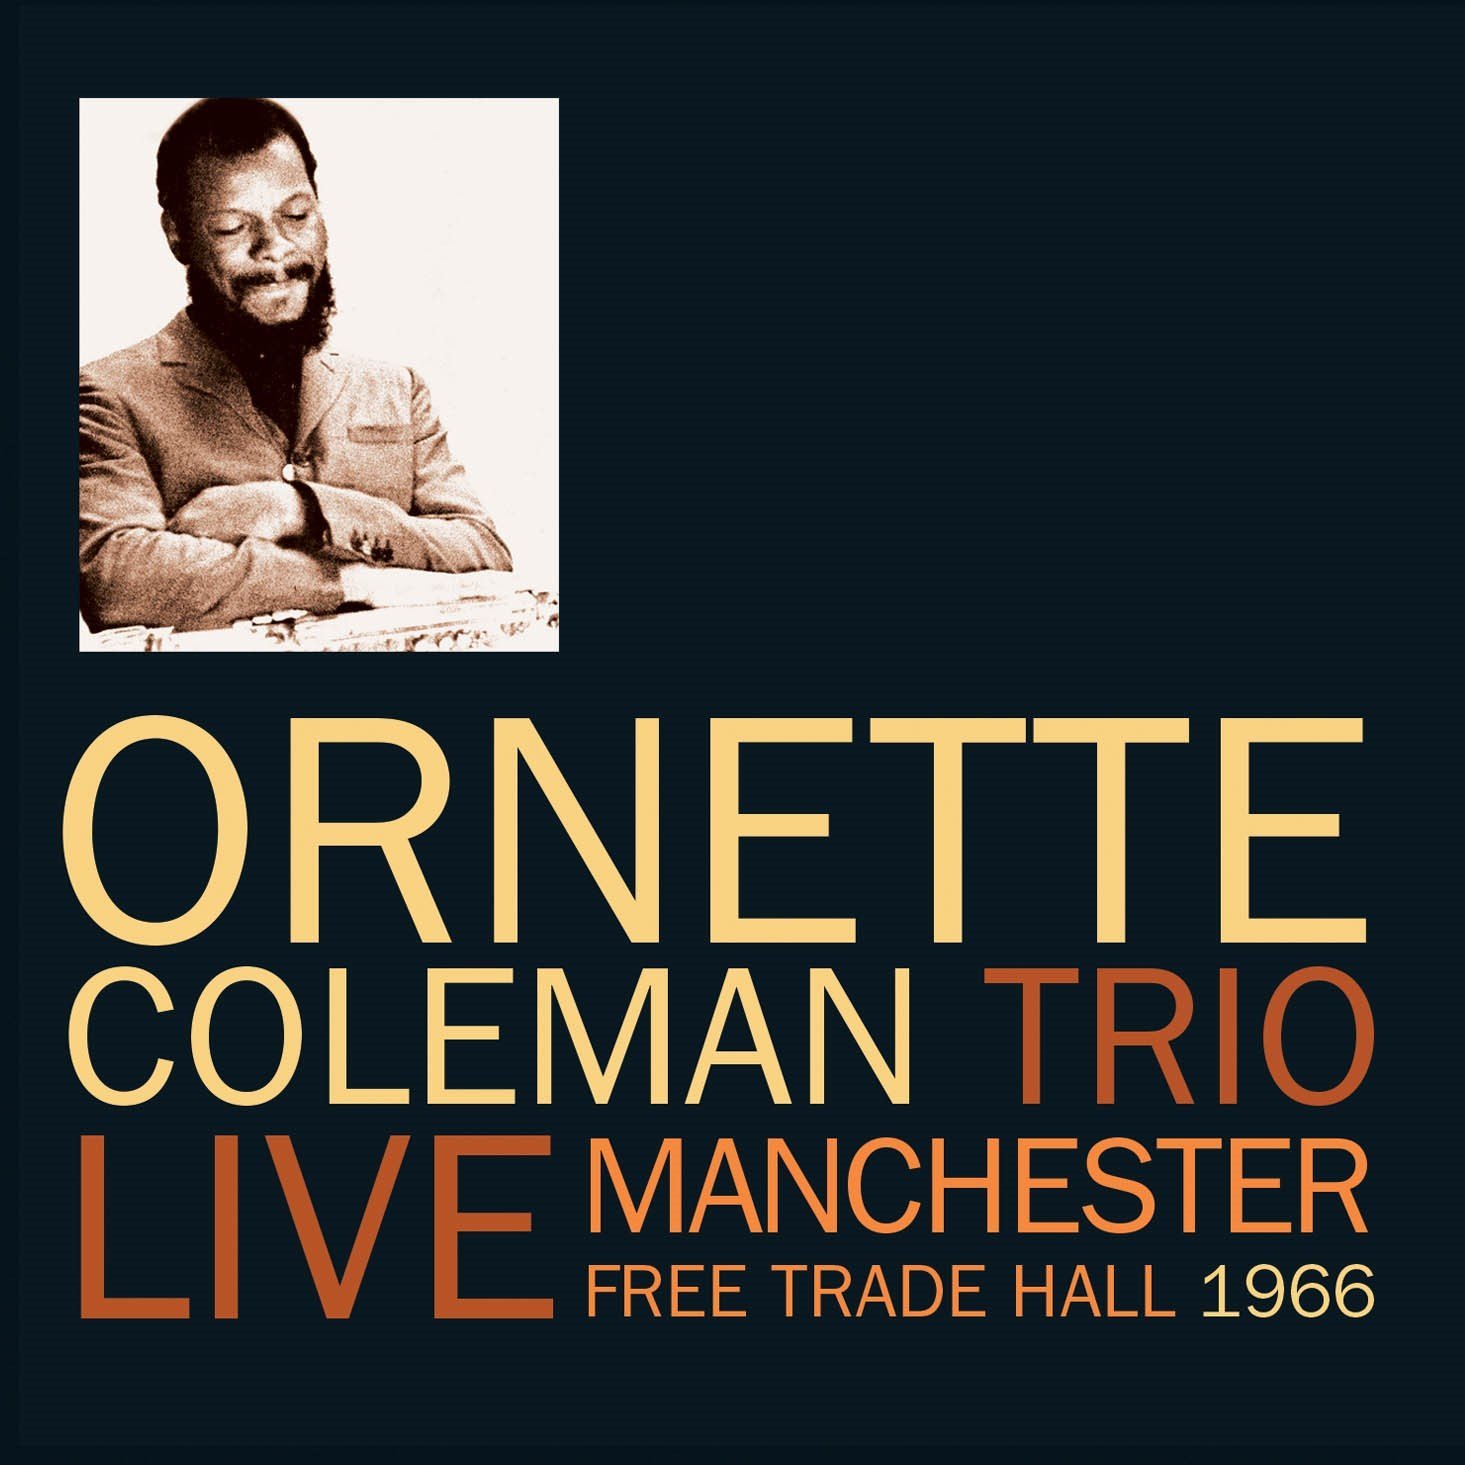 ORNETTE COLEMAN - Manchester Free Trade Hall 1966 cover 